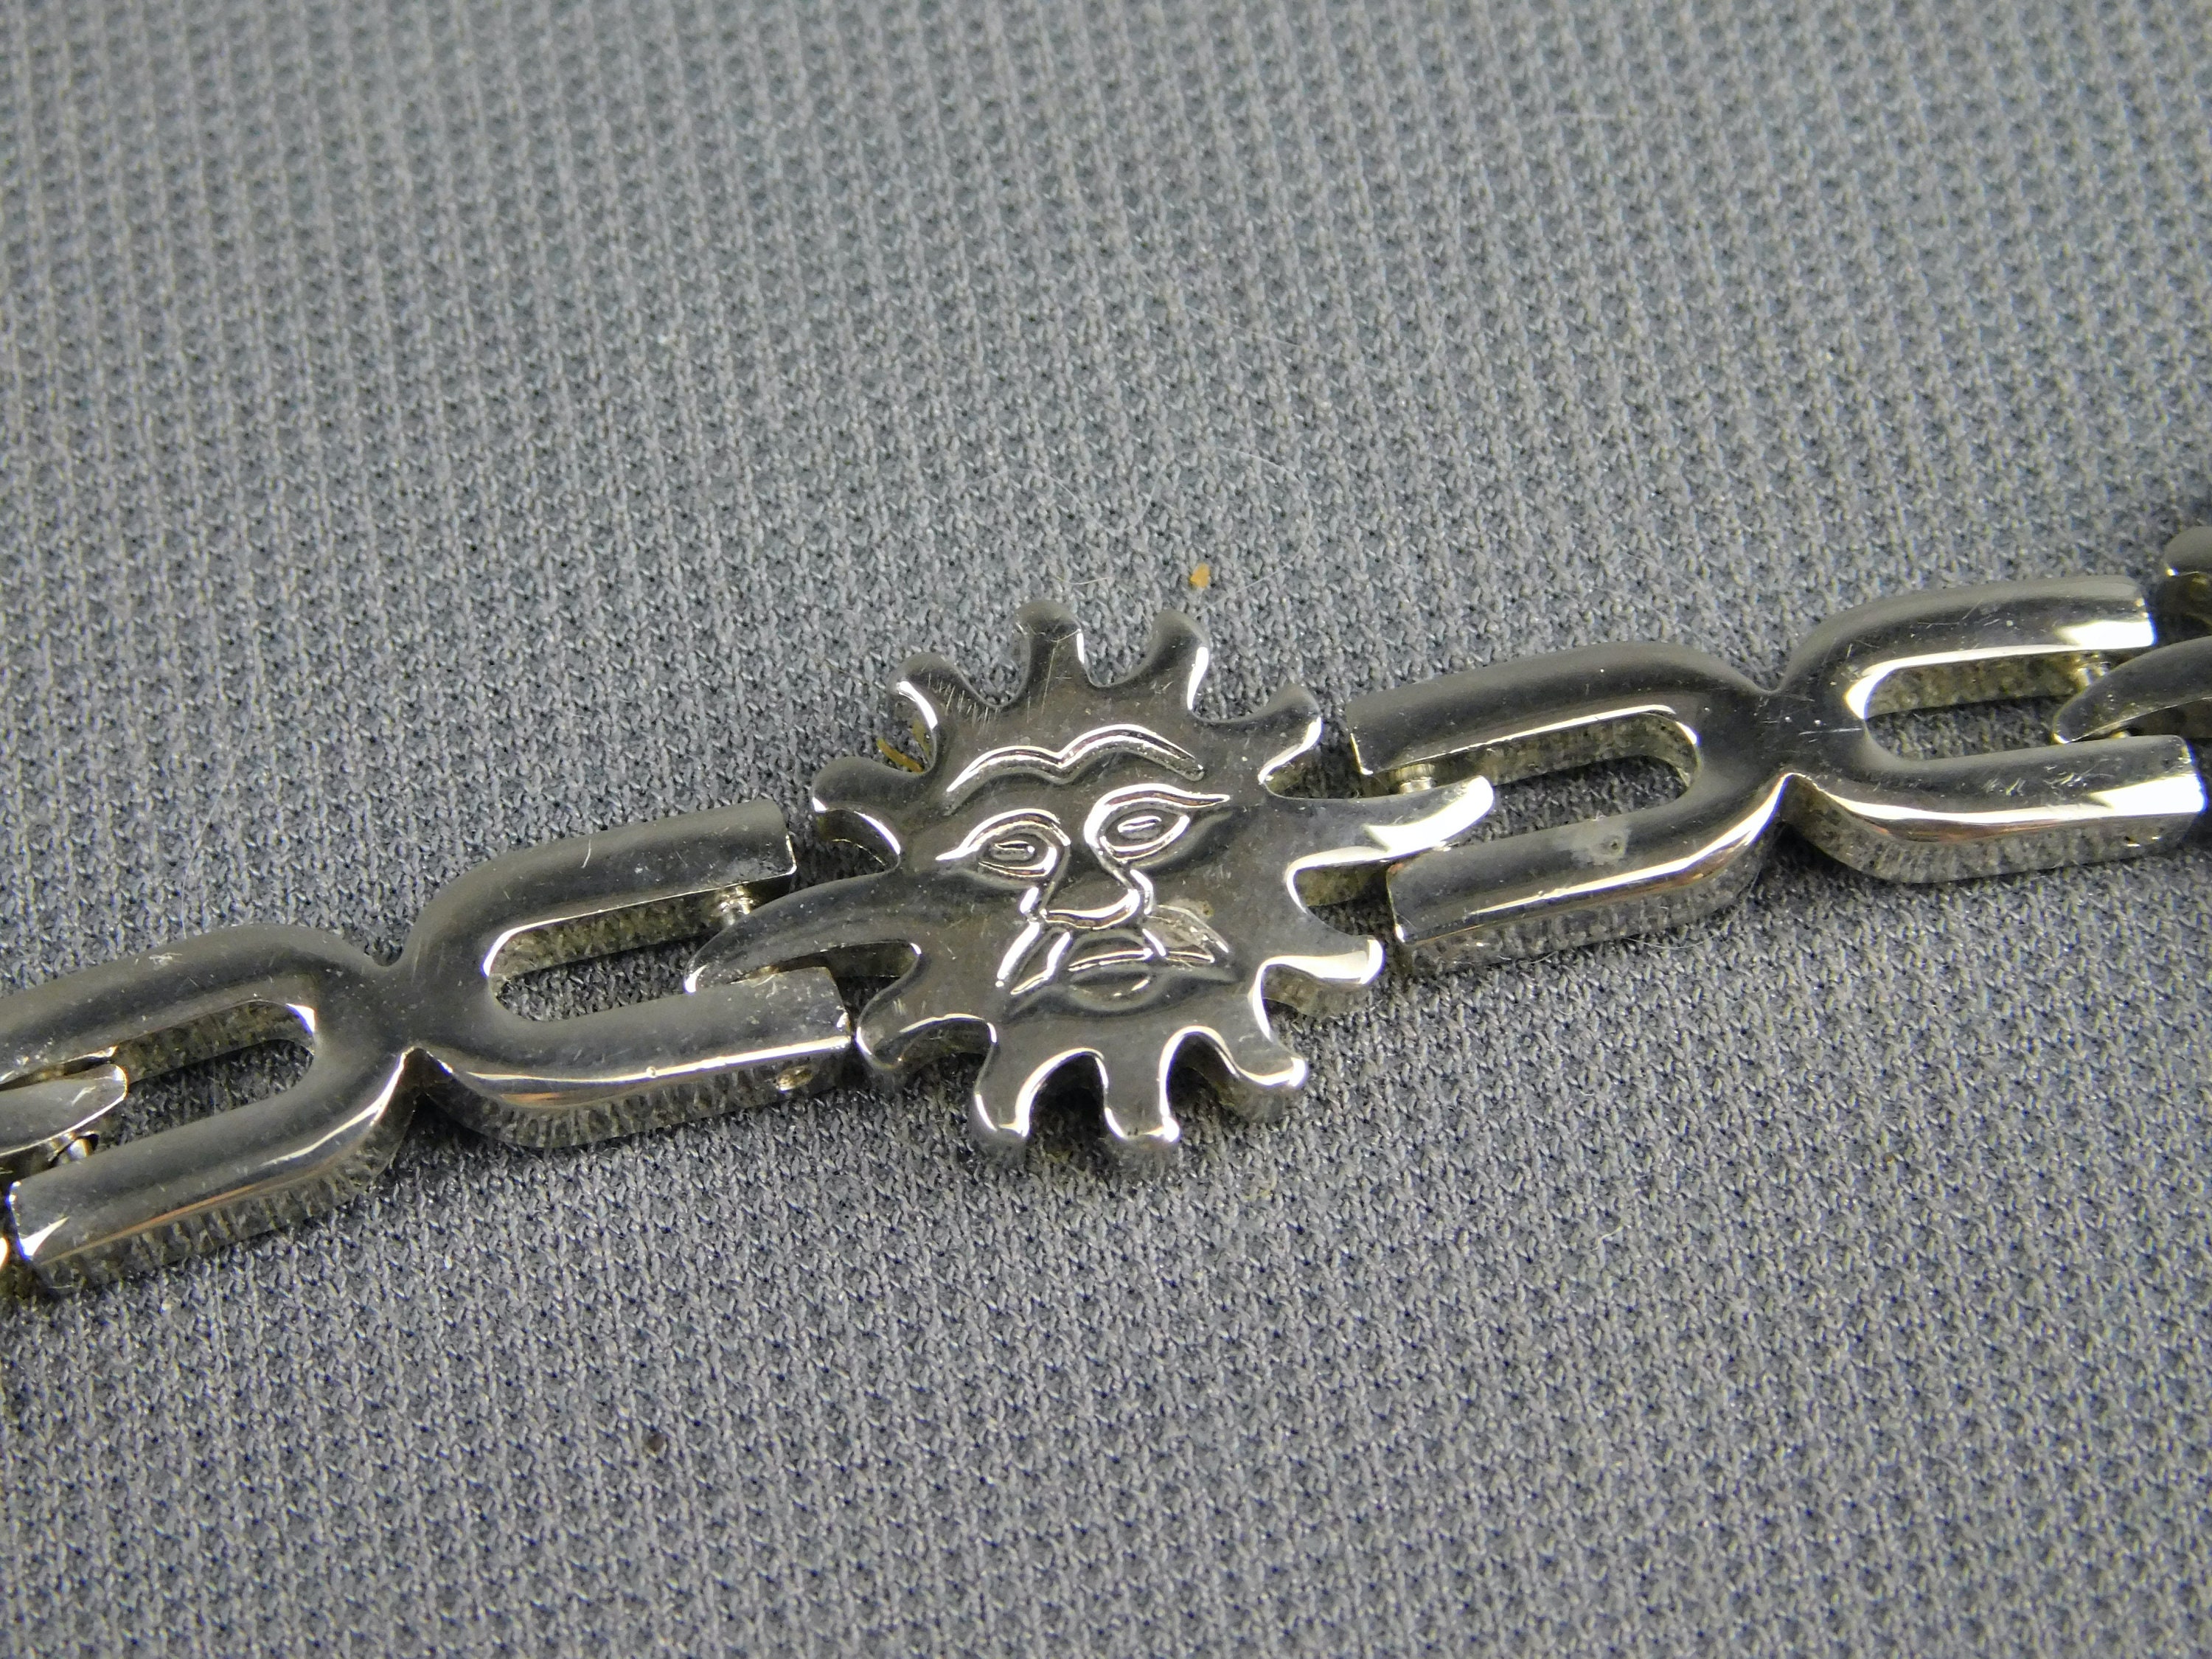 Vintage Sterling Silver Charm Bracelet and 6 Charms Mexican Silver Taxco  23366 – Schooner Chandlery